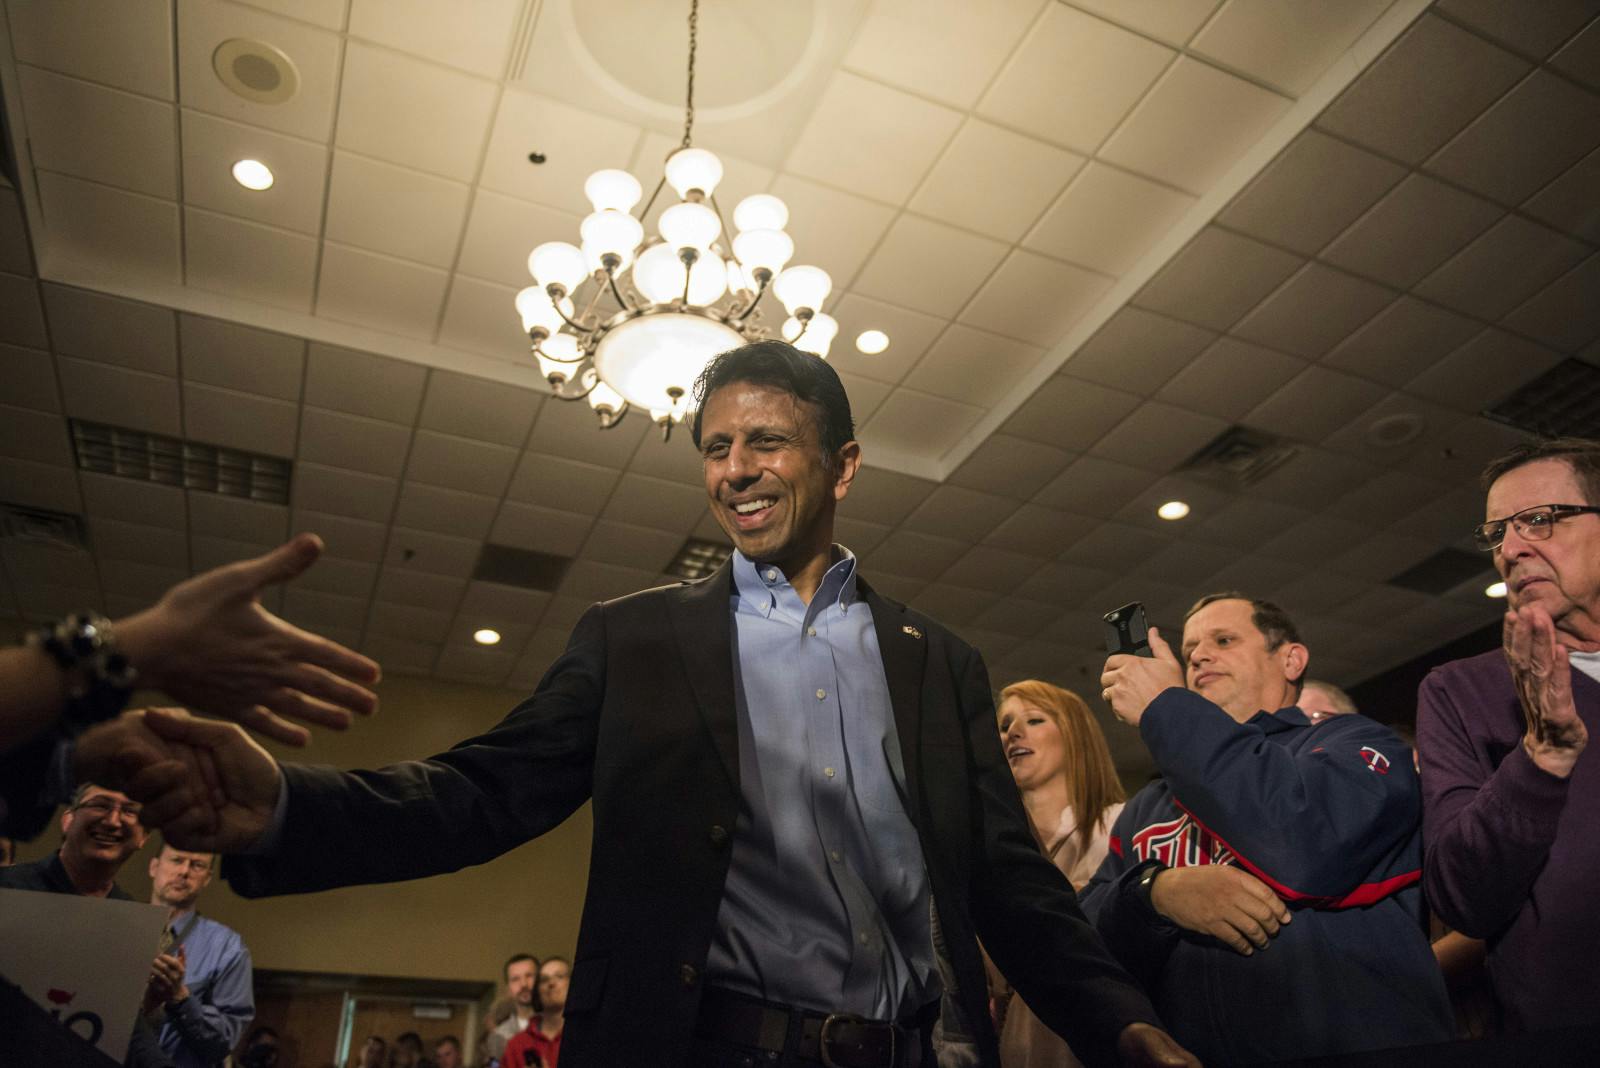 ANDOVER, MN- MARCH 1: Gov. Bobby Jindal (R-LA) introduces Republican presidential candidate Sen. Marco Rubio (R-Fla.) to a crowd of supporters Courtyards of Andover Event Center in Andover, MN. Rubio is hoping to win Minnesota in the Super Tuesday primary election. (Photo by Stephen Maturen/Getty Images)
